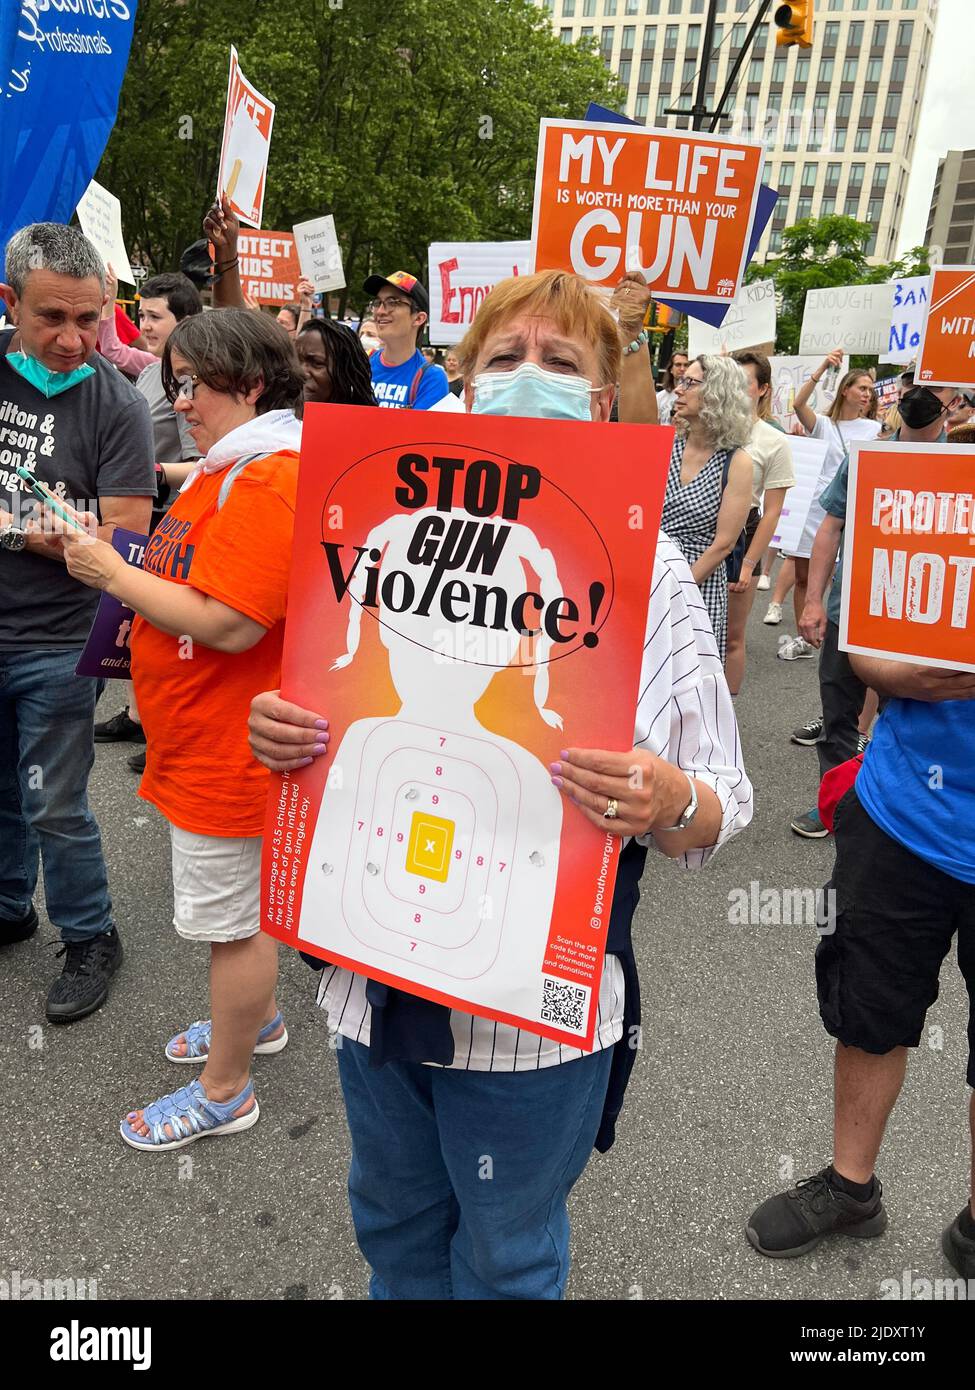 'March For Our Lives' demonstration and march across the Brooklyn Bridge from Cadman Plaza, Brooklyn to City Hall speaking out for substantive gun laws to protect children and all citizens after recent mass shootings and slaughter around the United States. Stock Photo